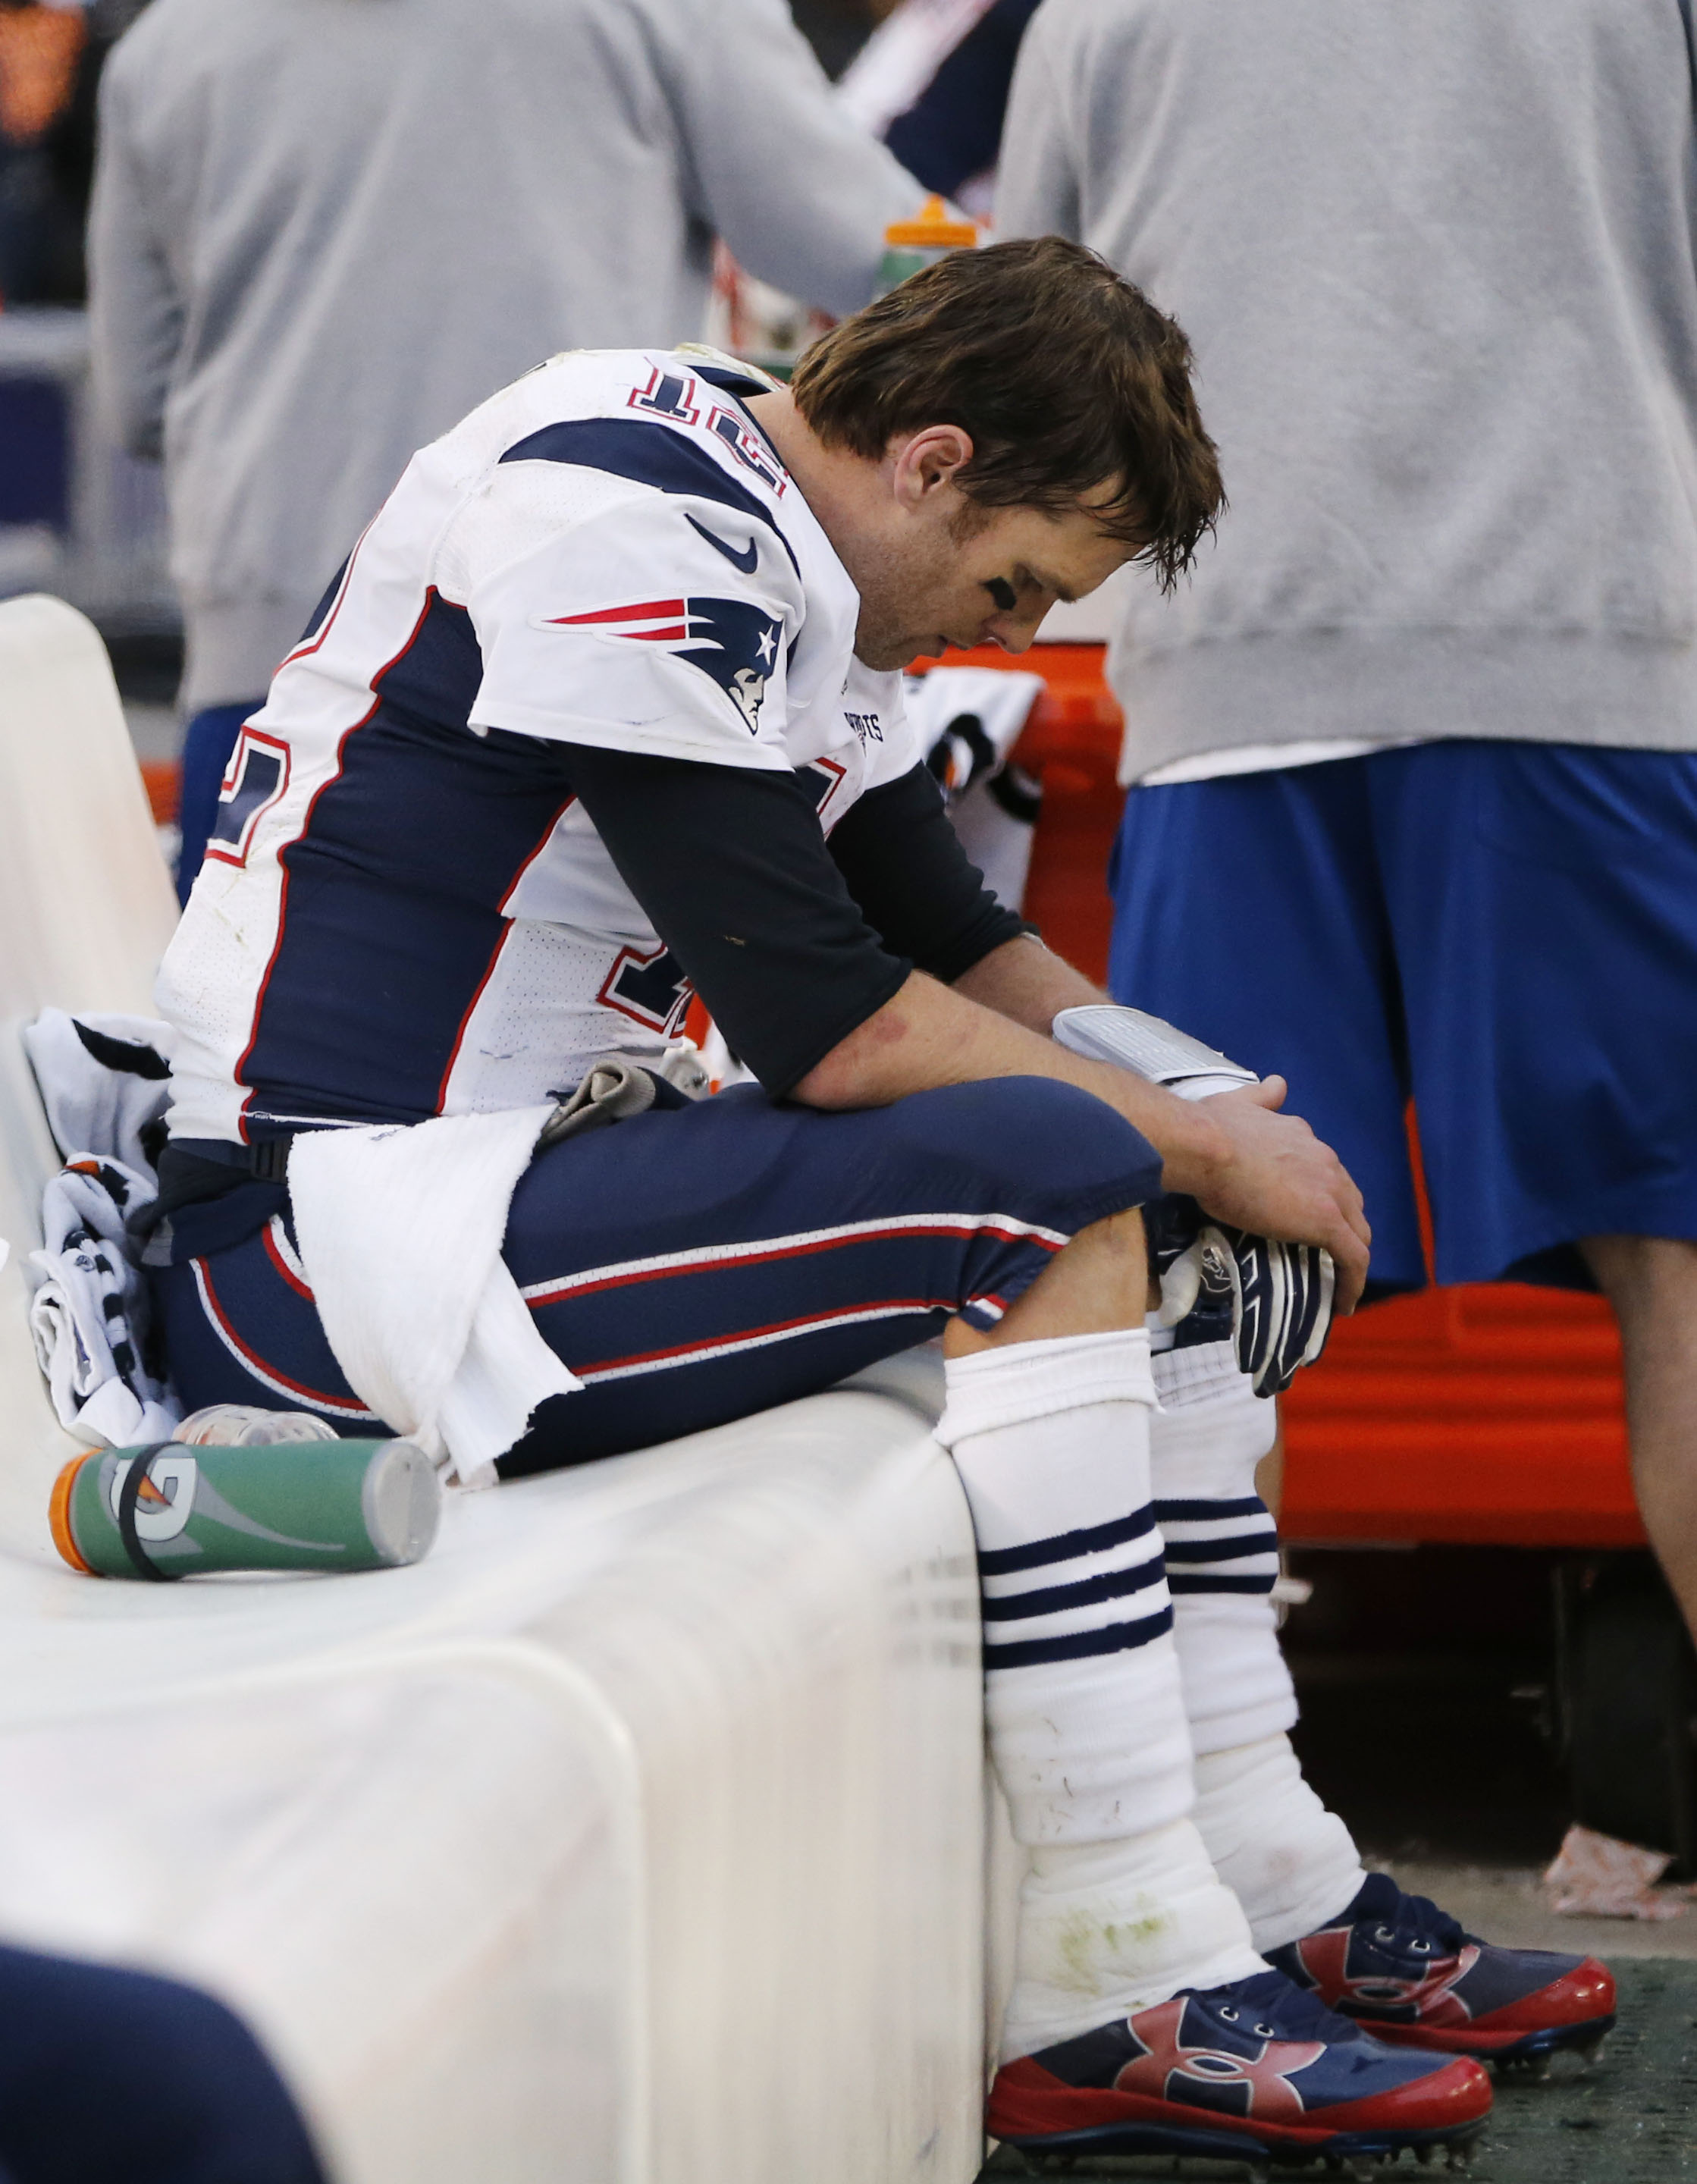 After Sunday's loss, Tom Brady is 2-7 in Denver.